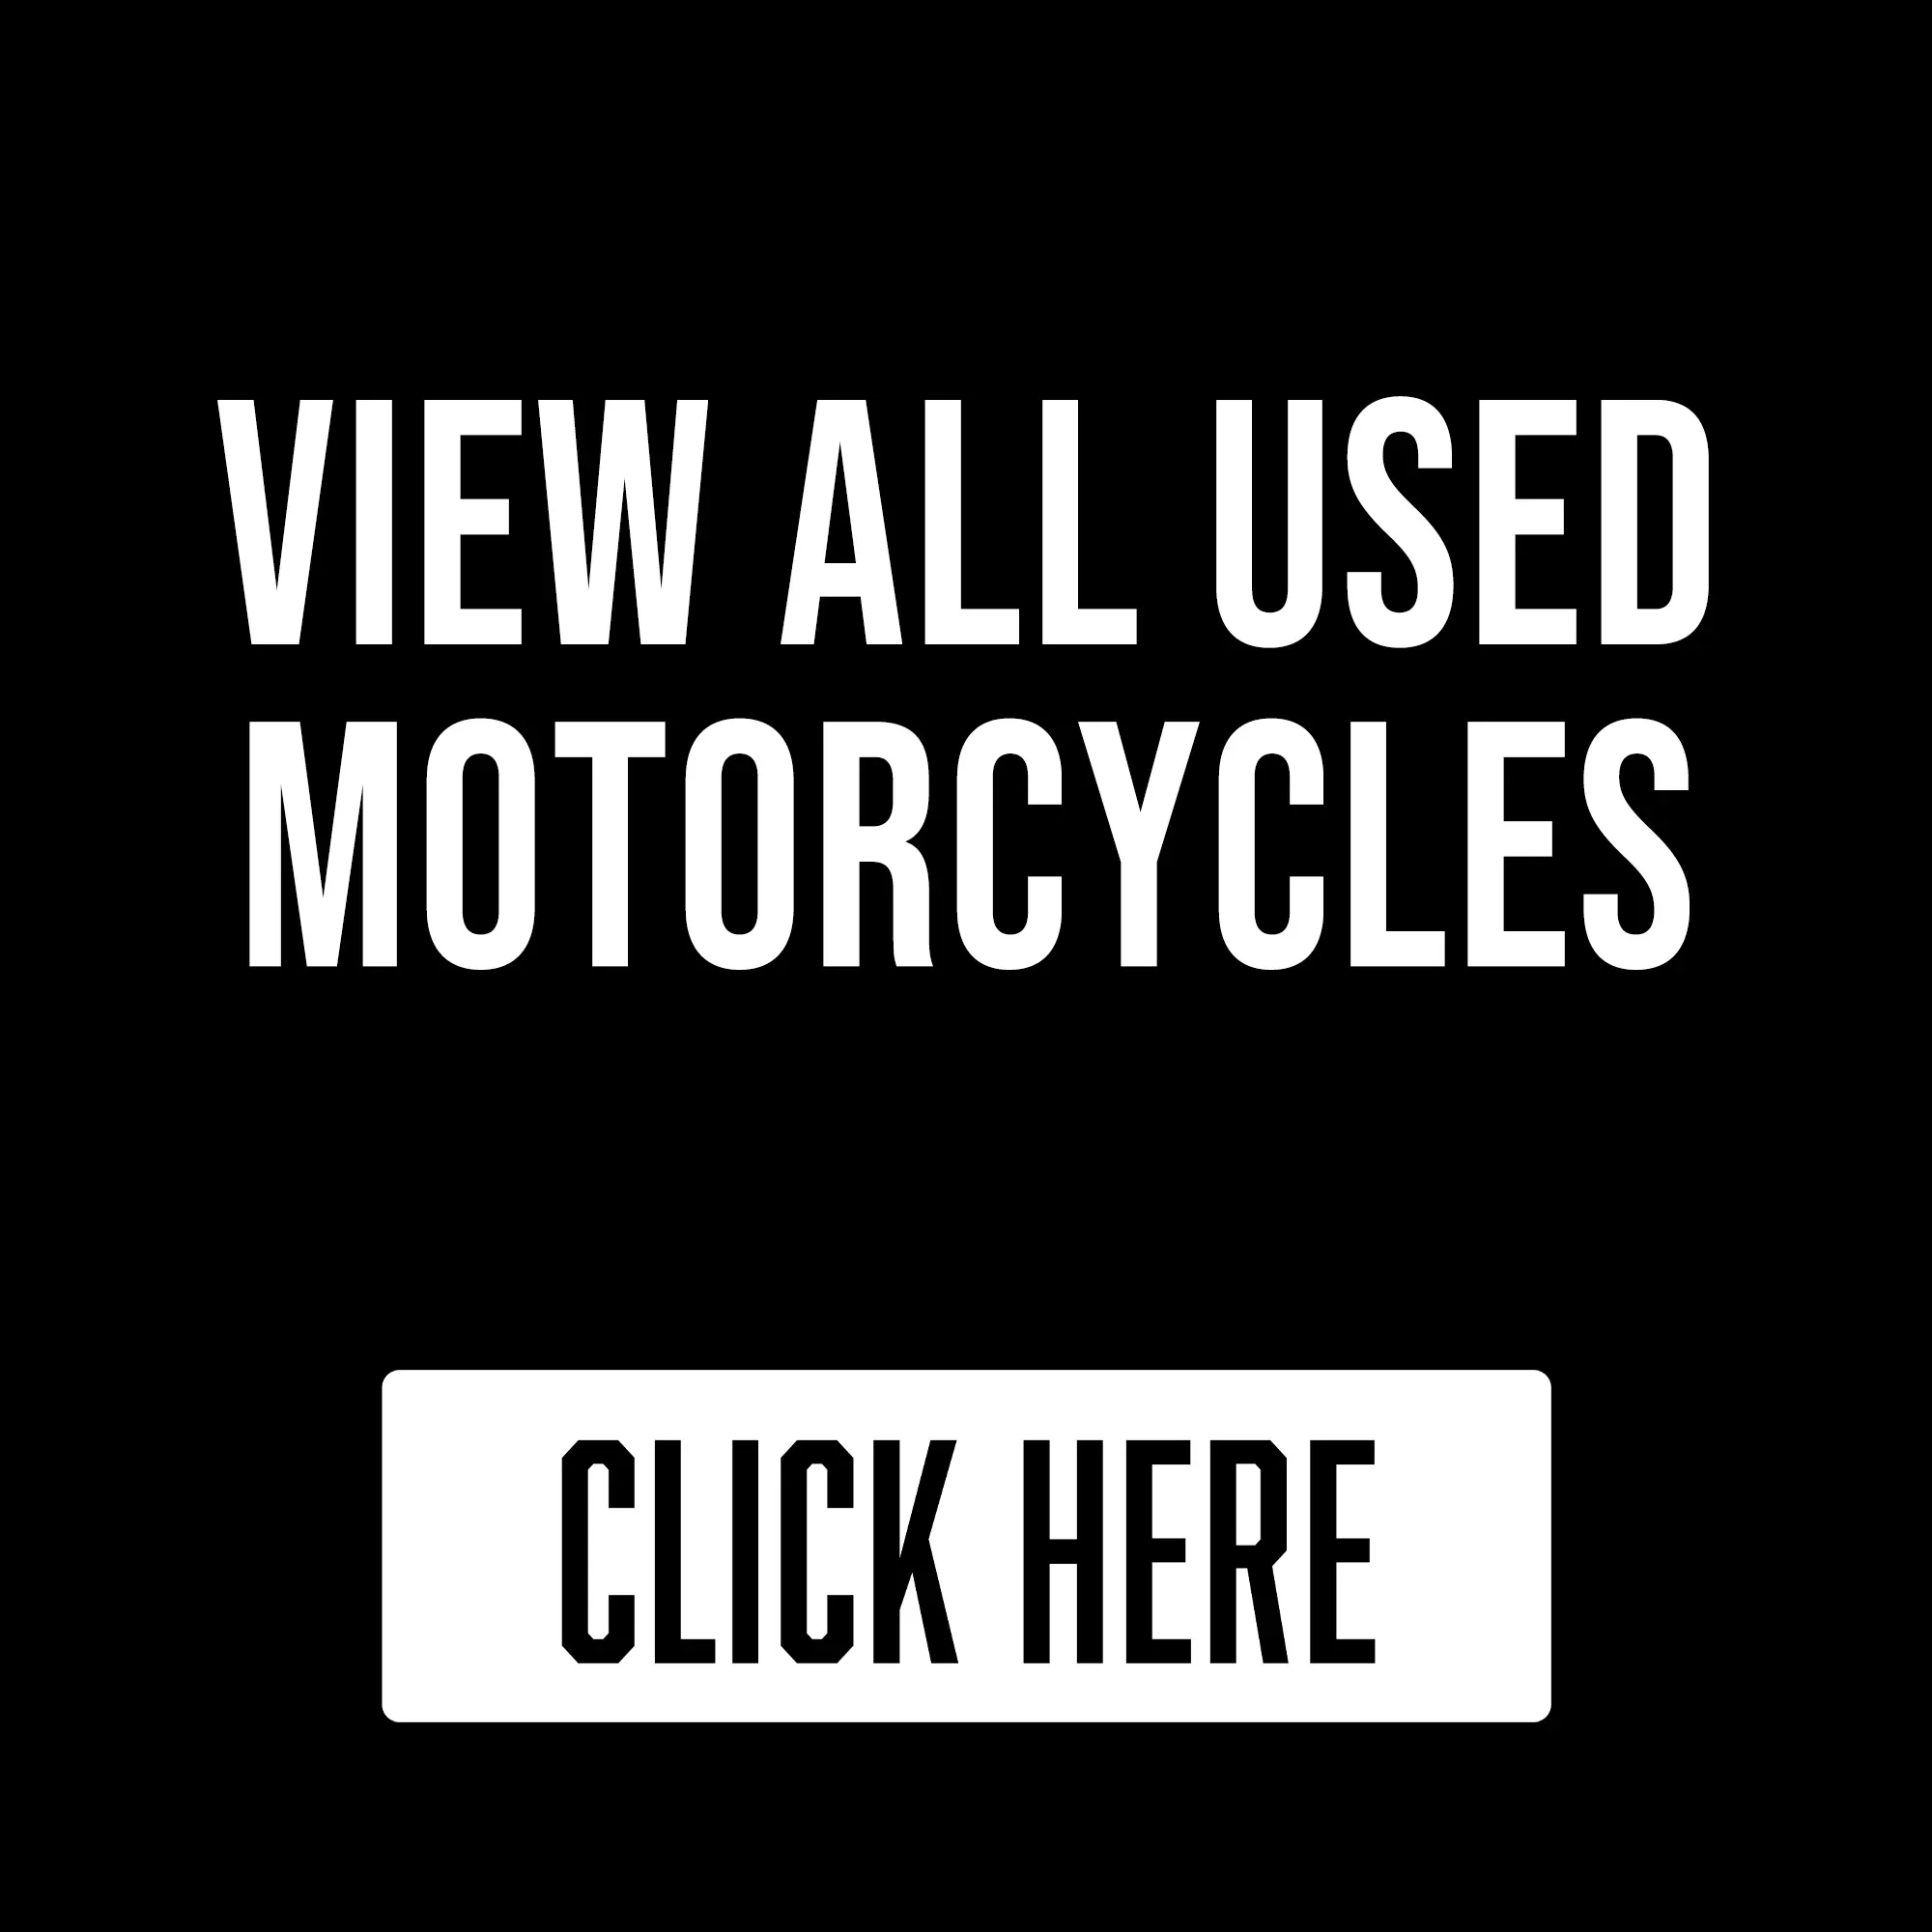 All used motorcycles